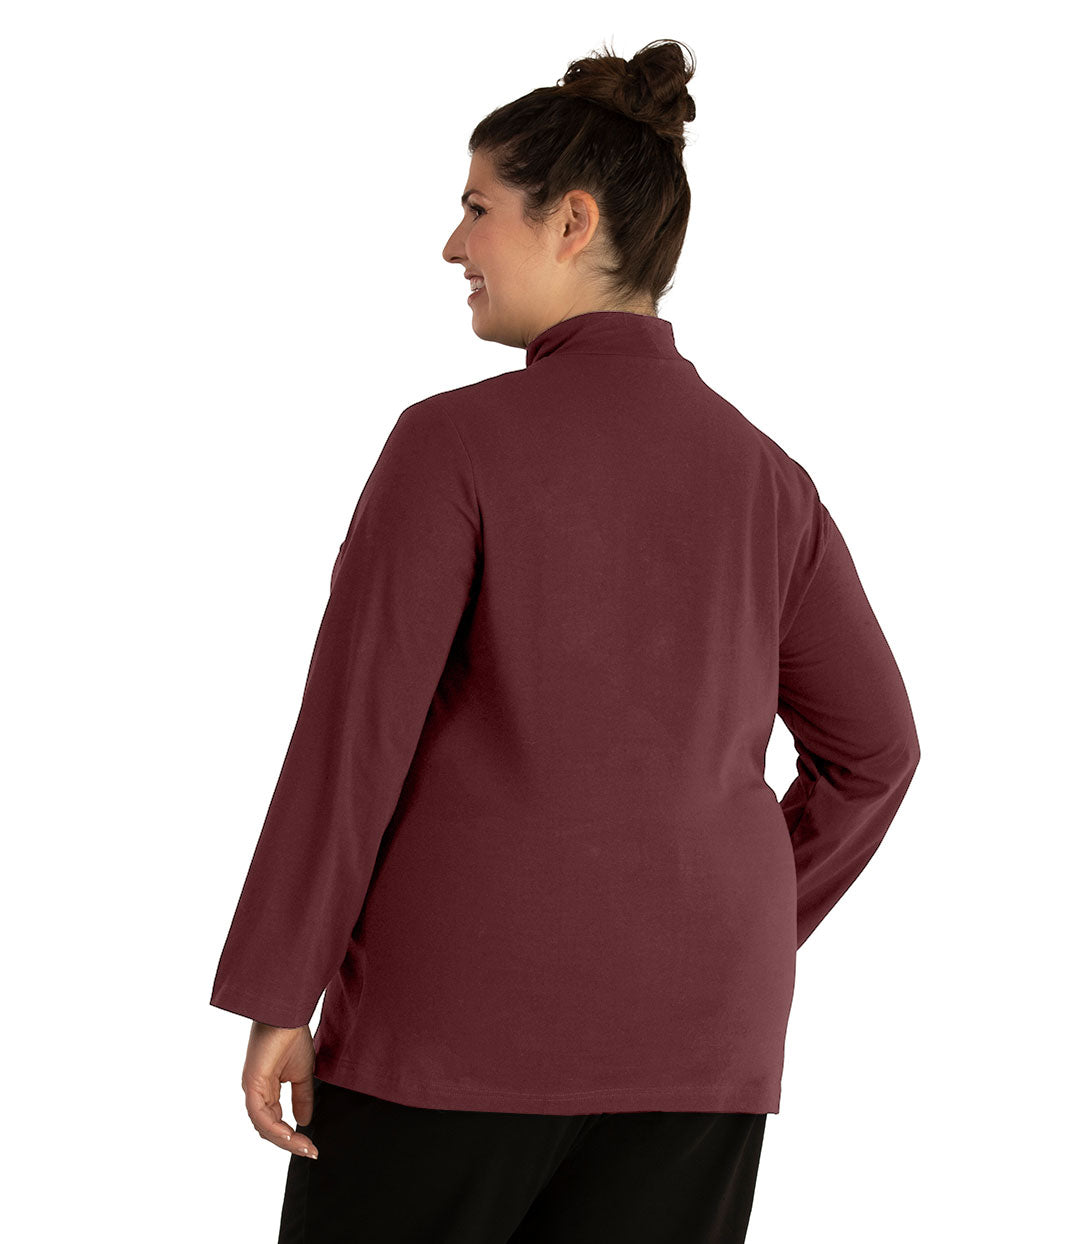 Plus size woman, facing back looking left, wearing JunoActive plus size Stretch Naturals Lite Mock Neck Top in the color Chestnut. She is wearing JunoActive Plus Size Leggings in the color Black.